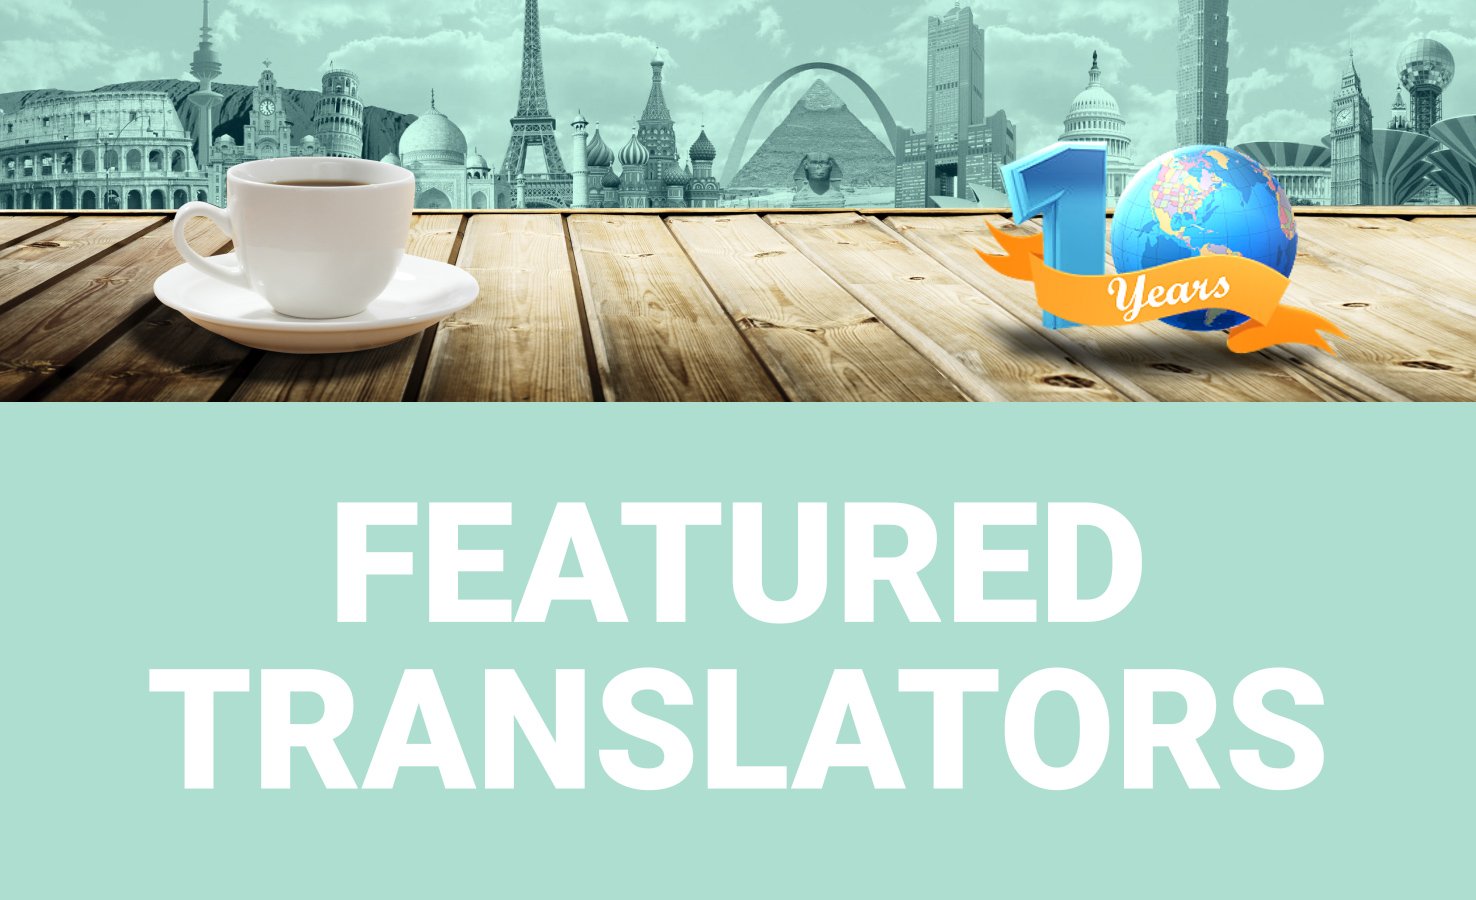 Meet Day Translations Top Translators in Our Anniversary Feature